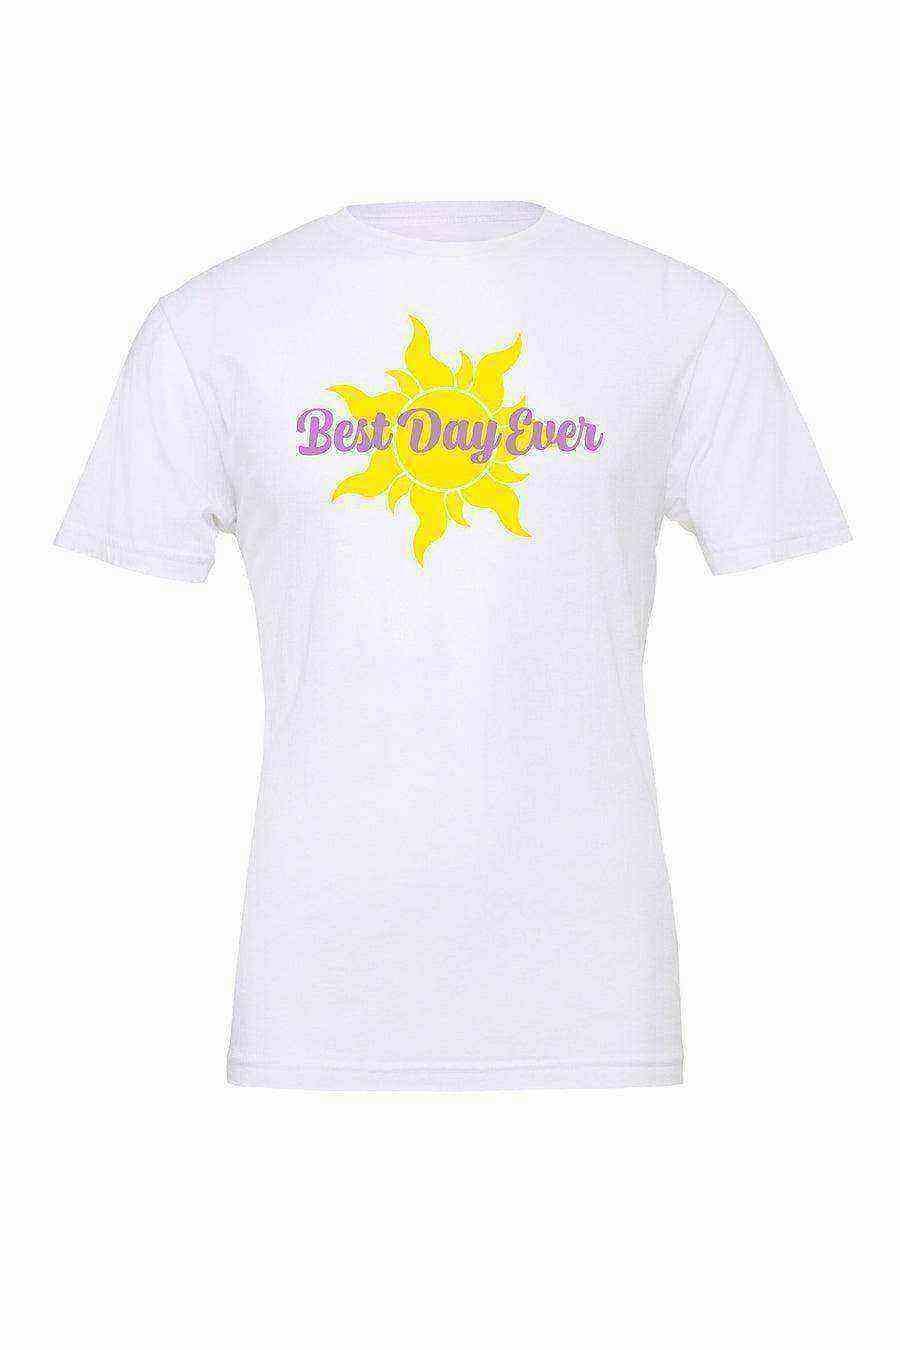 Toddler | Tangled Tee | Rapunzel Best Day Ever - Dylan's Tees